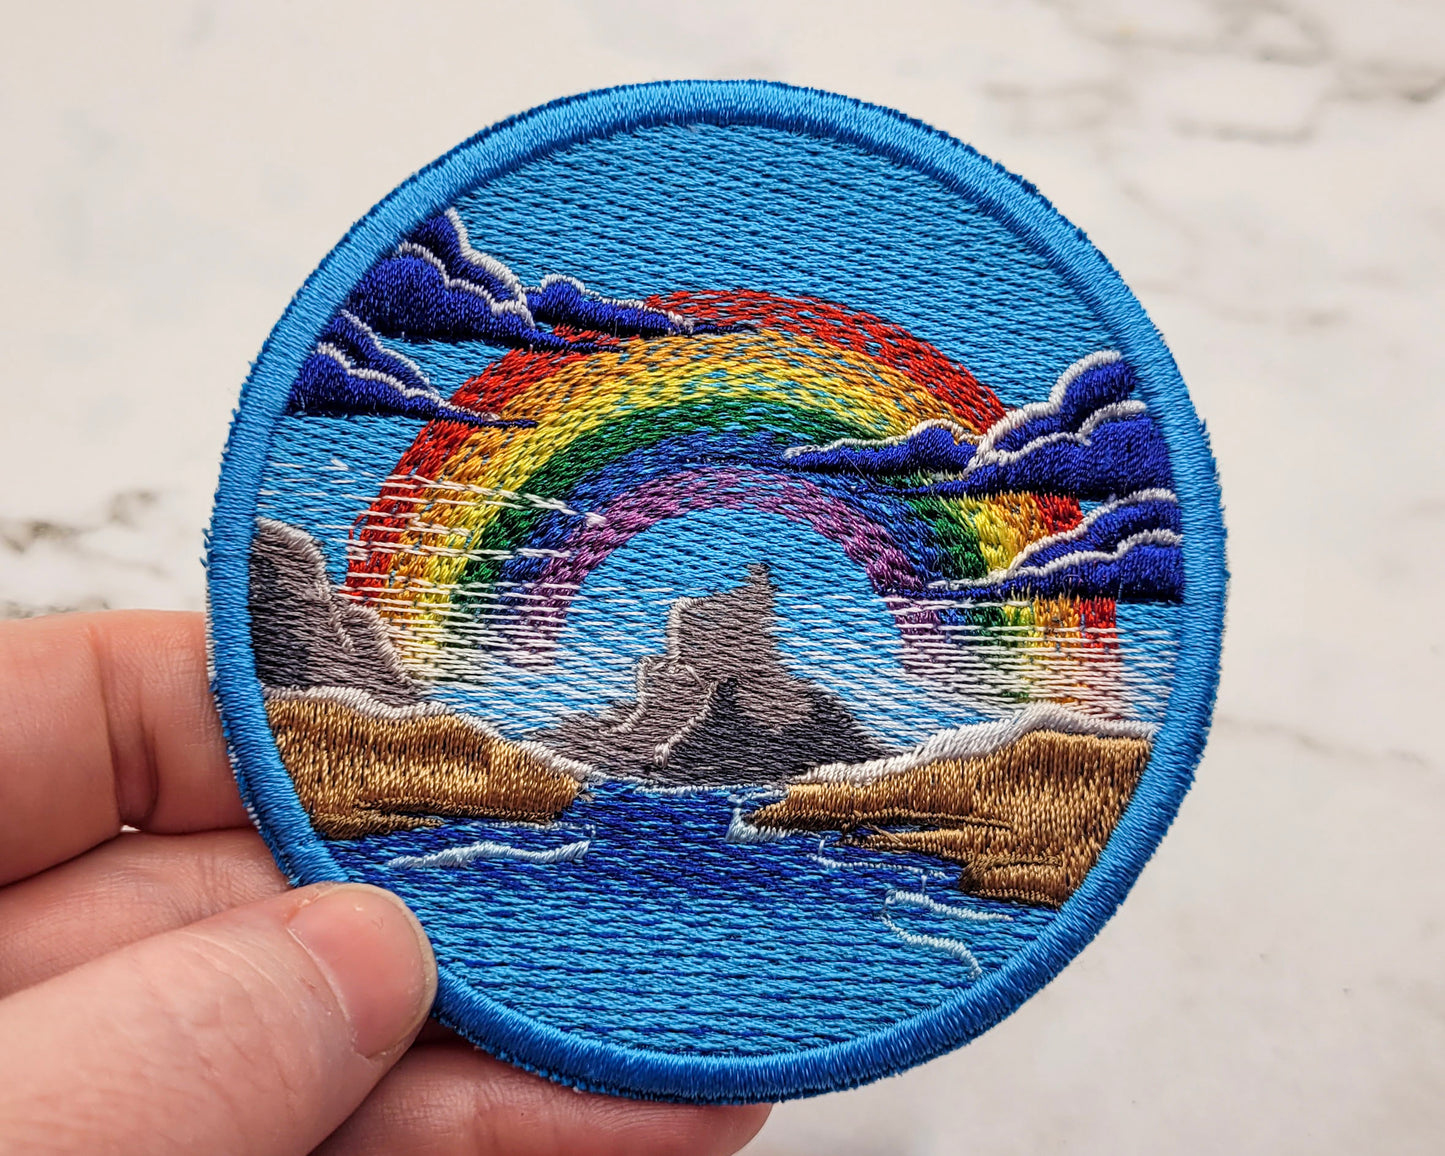 Mountain Lake Rainbow Embroidered Patch